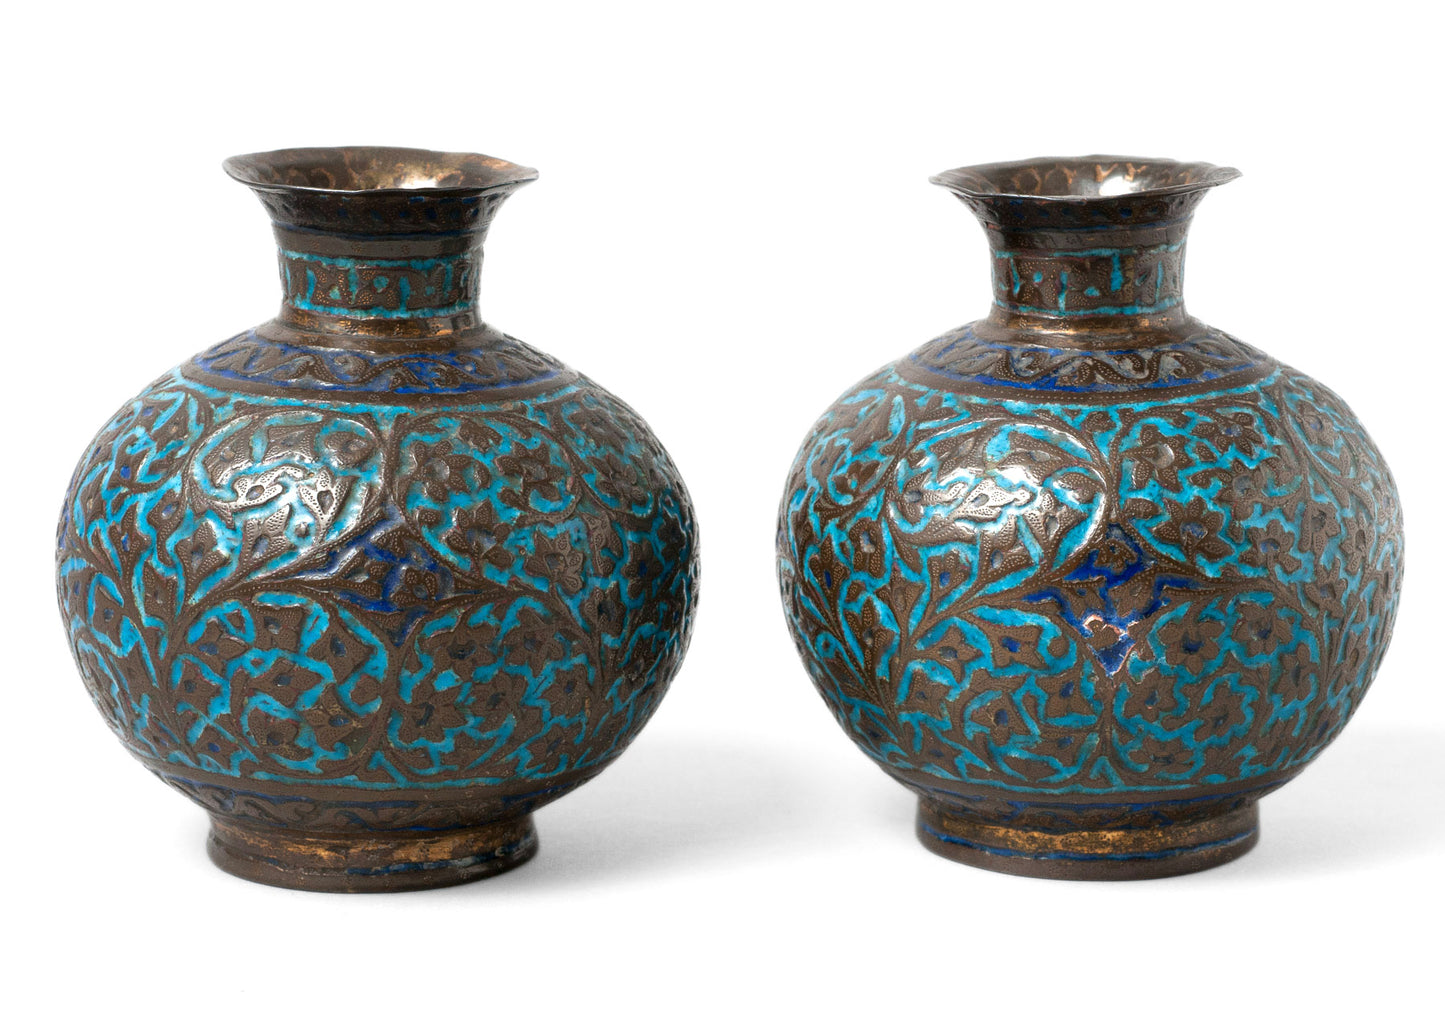 Pair of Antique Kashmir / Indo-Persian Vases with Enamel and Raised Patterns & Script Marks (Code 0317)